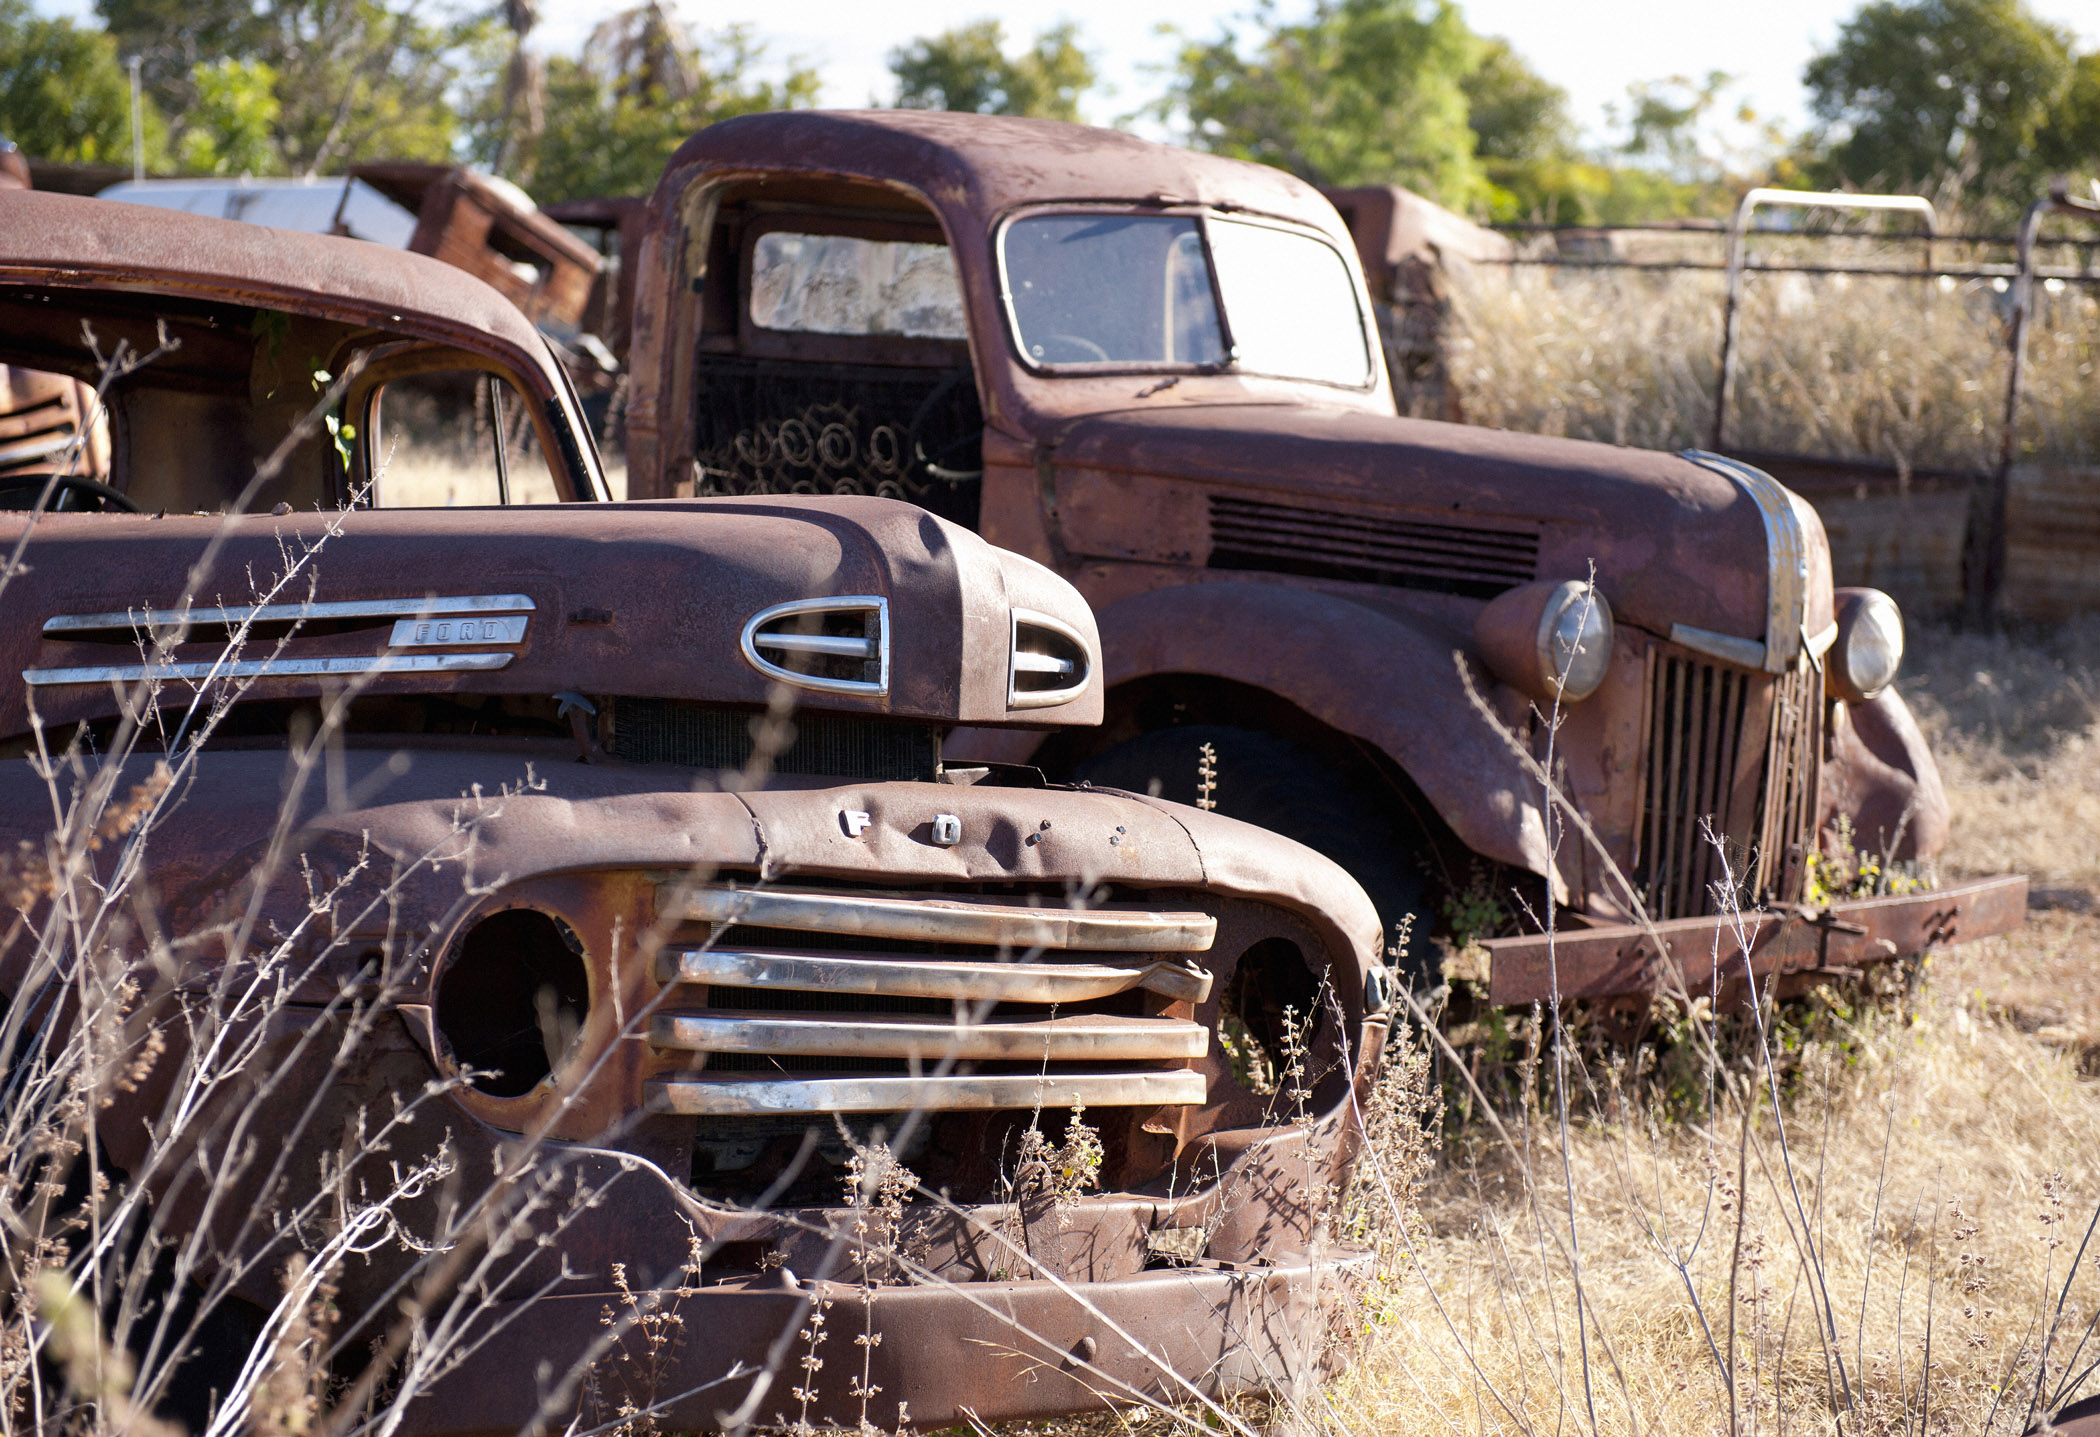 Old Ford Trucks rusting